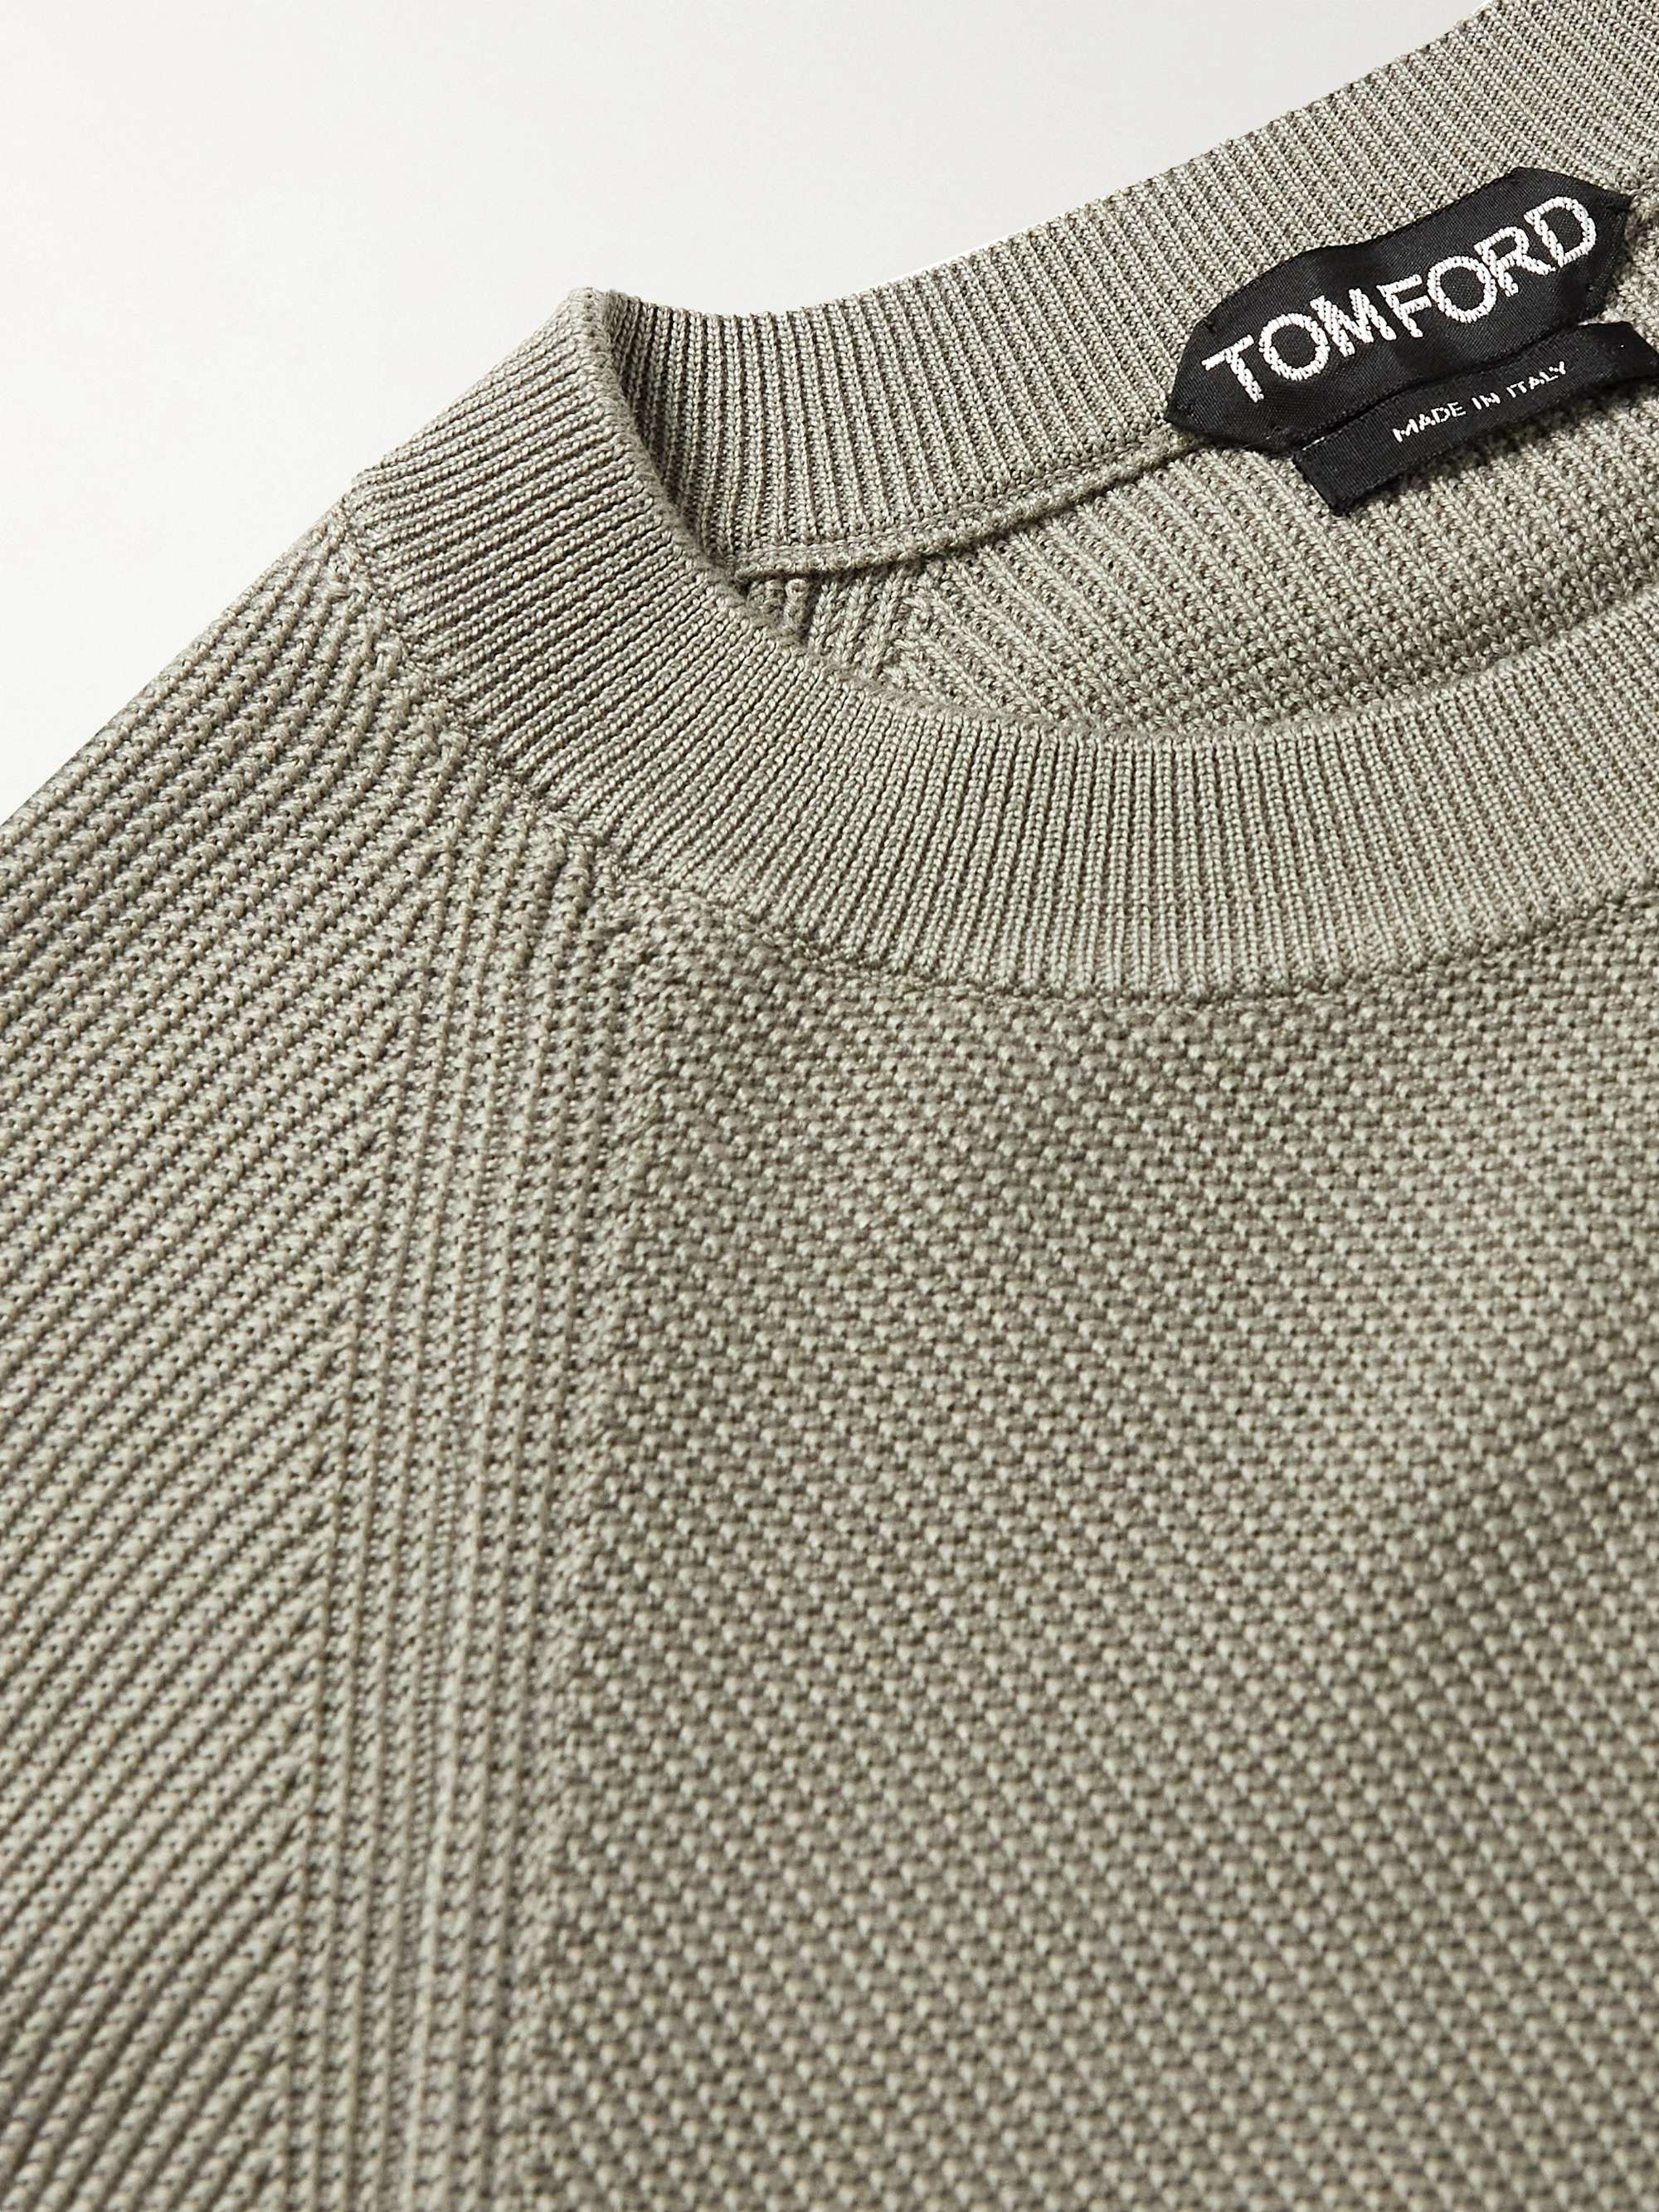 TOM FORD Cotton and Silk-Blend Sweater